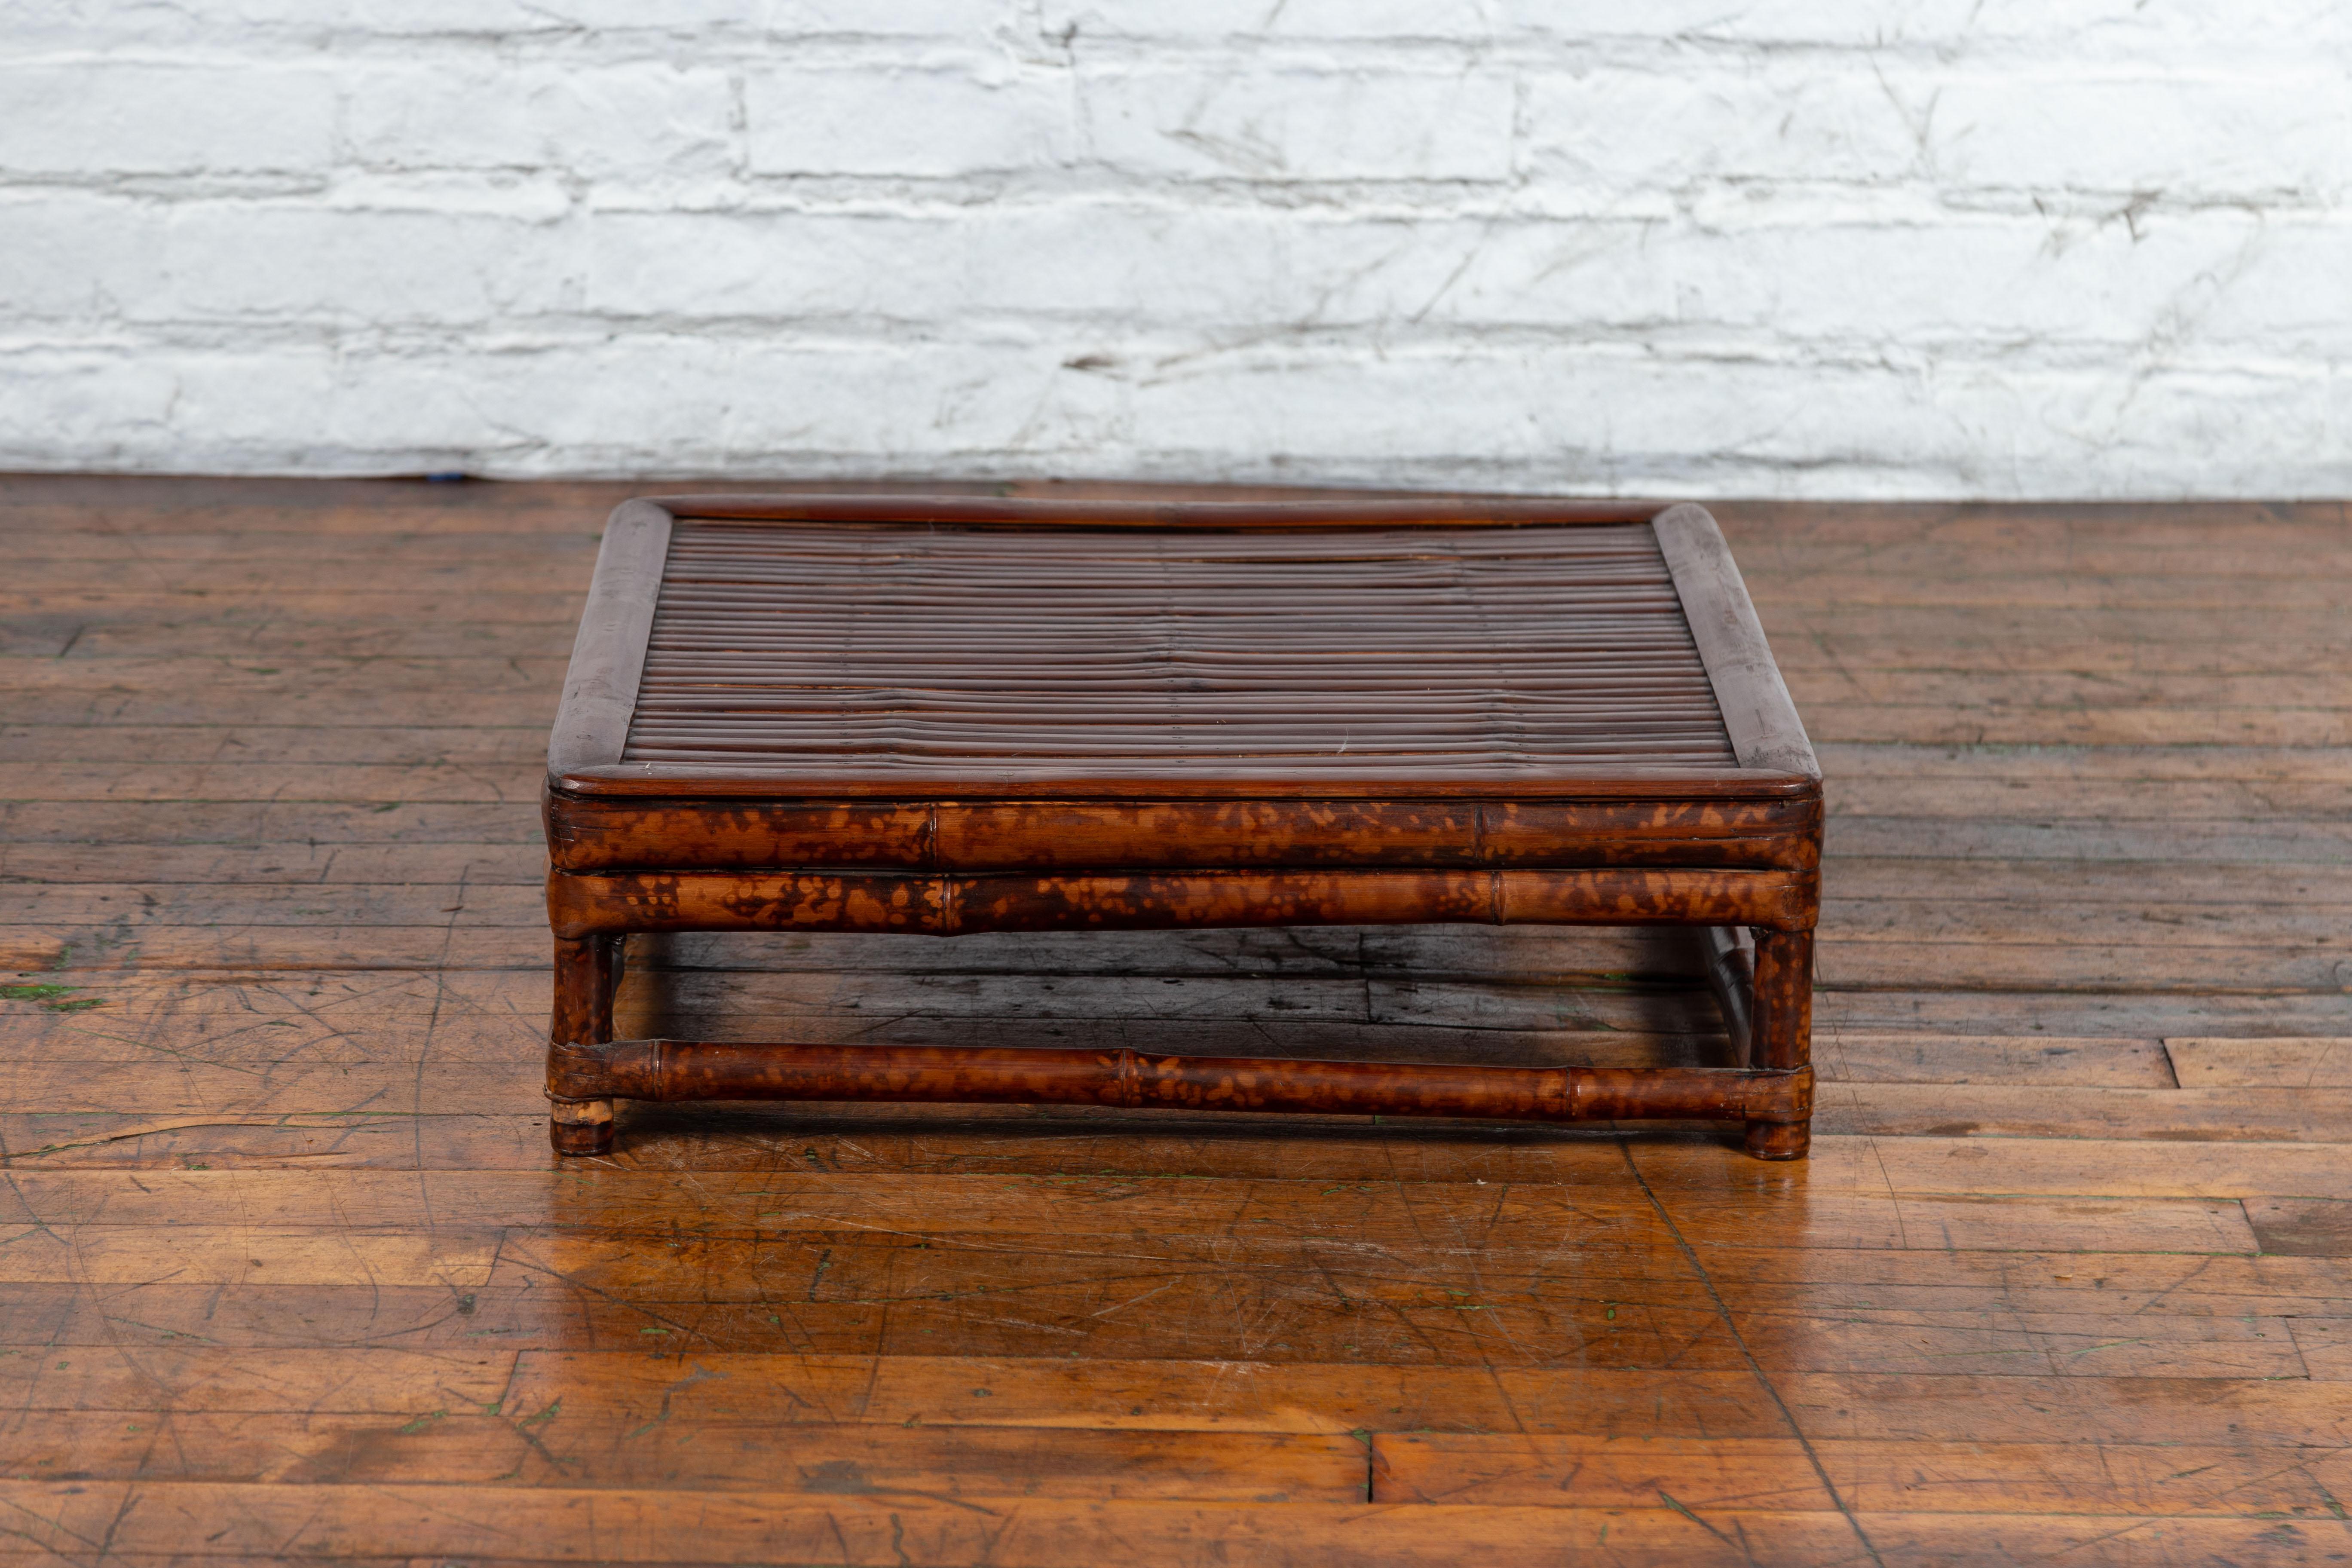 A Chinese Qing Dynasty bamboo low coffee table from the 19th century, with slatted top. Created in China during the Qing Dynasty, this low bamboo coffee table features a square slatted top sitting above four straight legs connected to one another